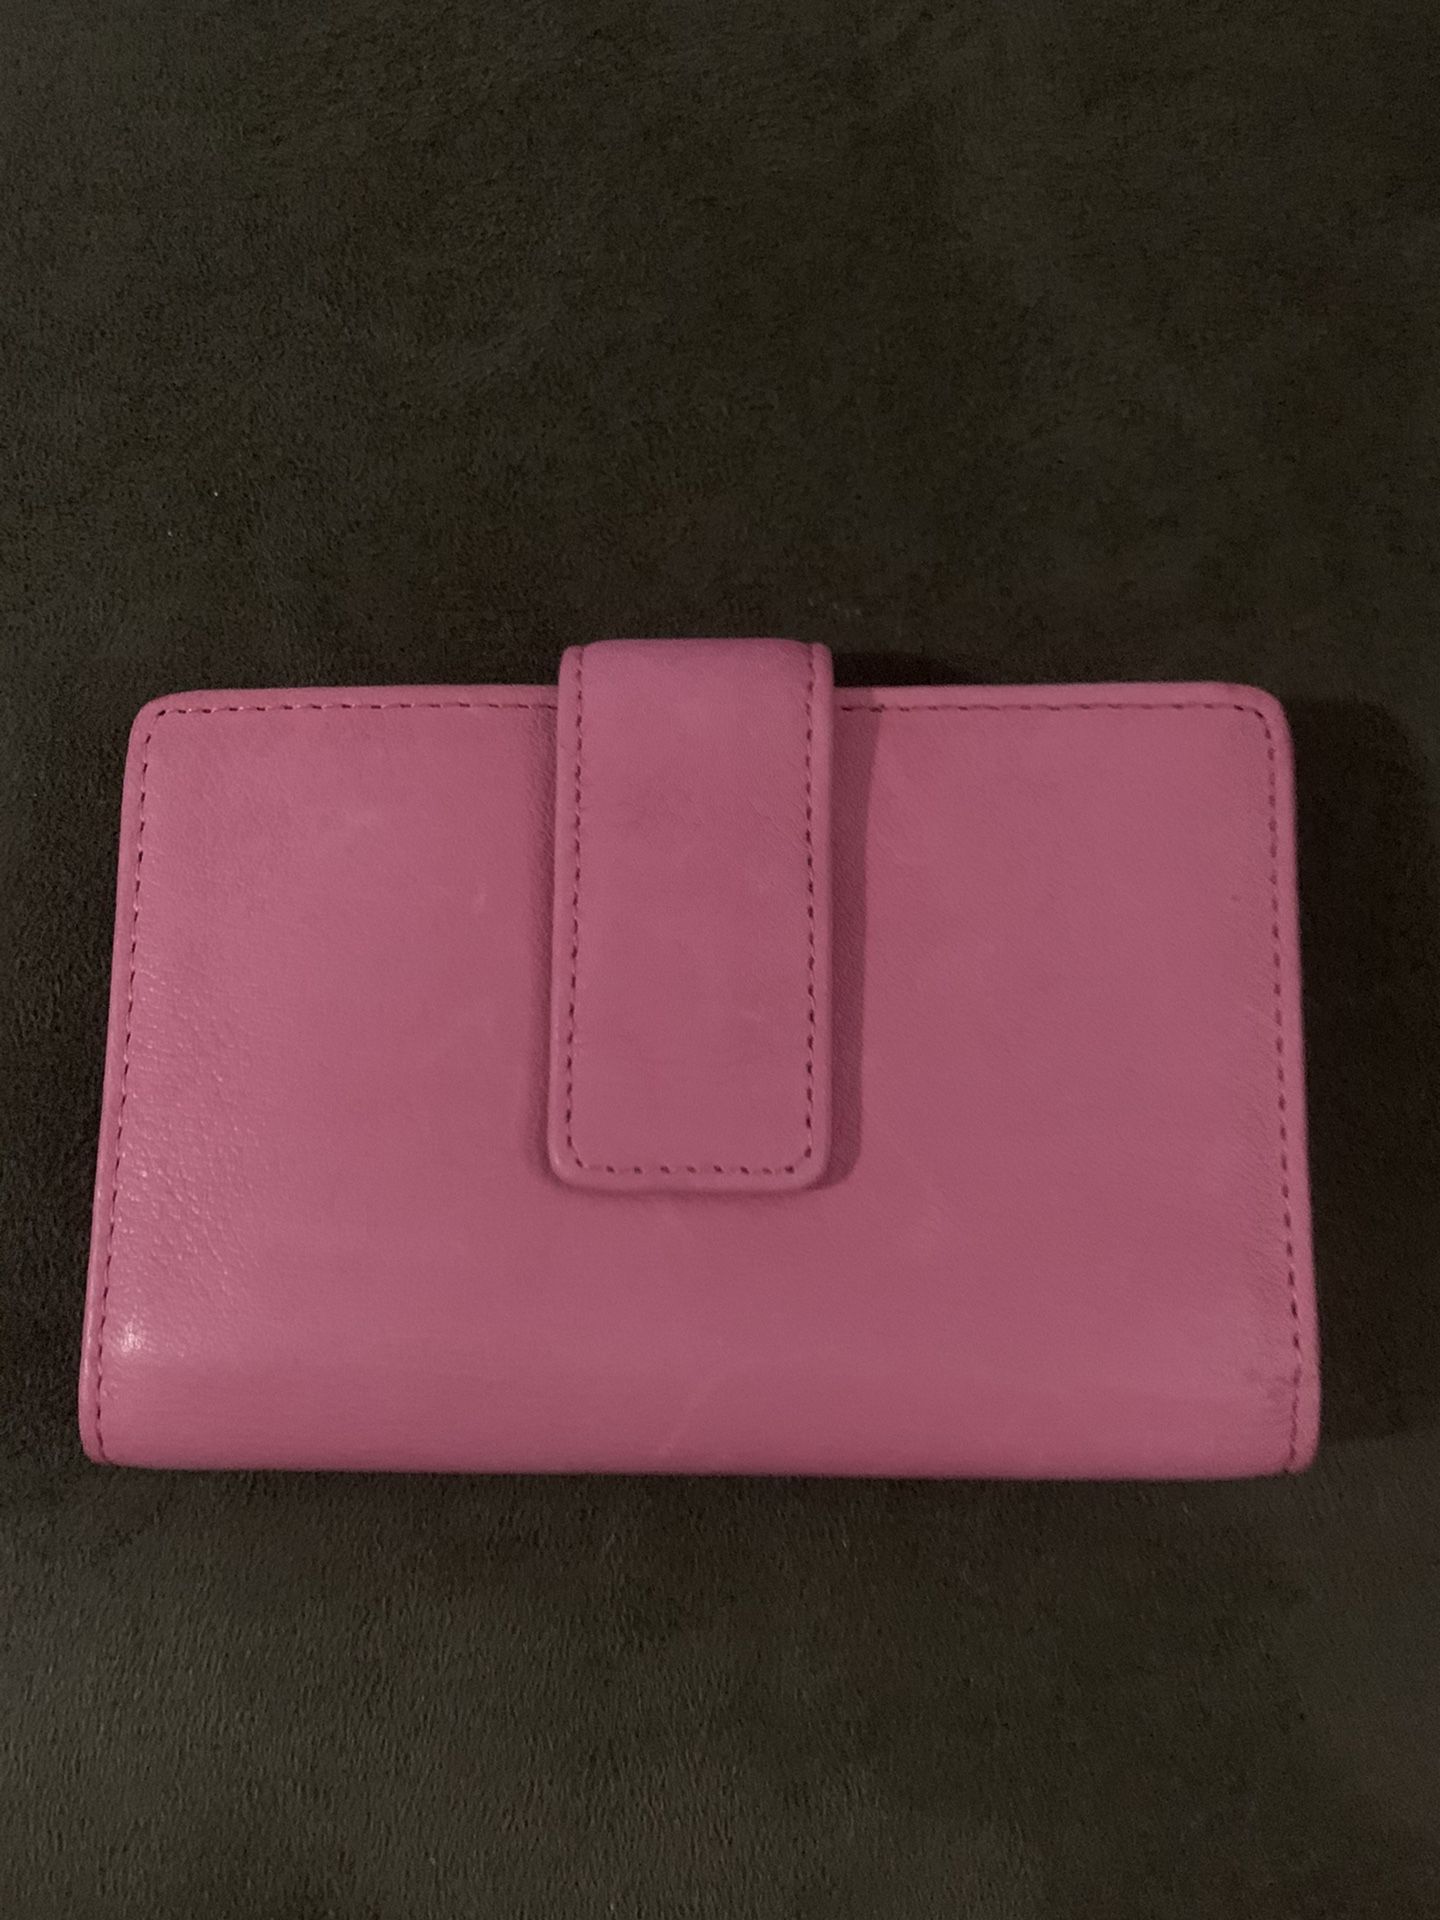 Pink leather compact wallet